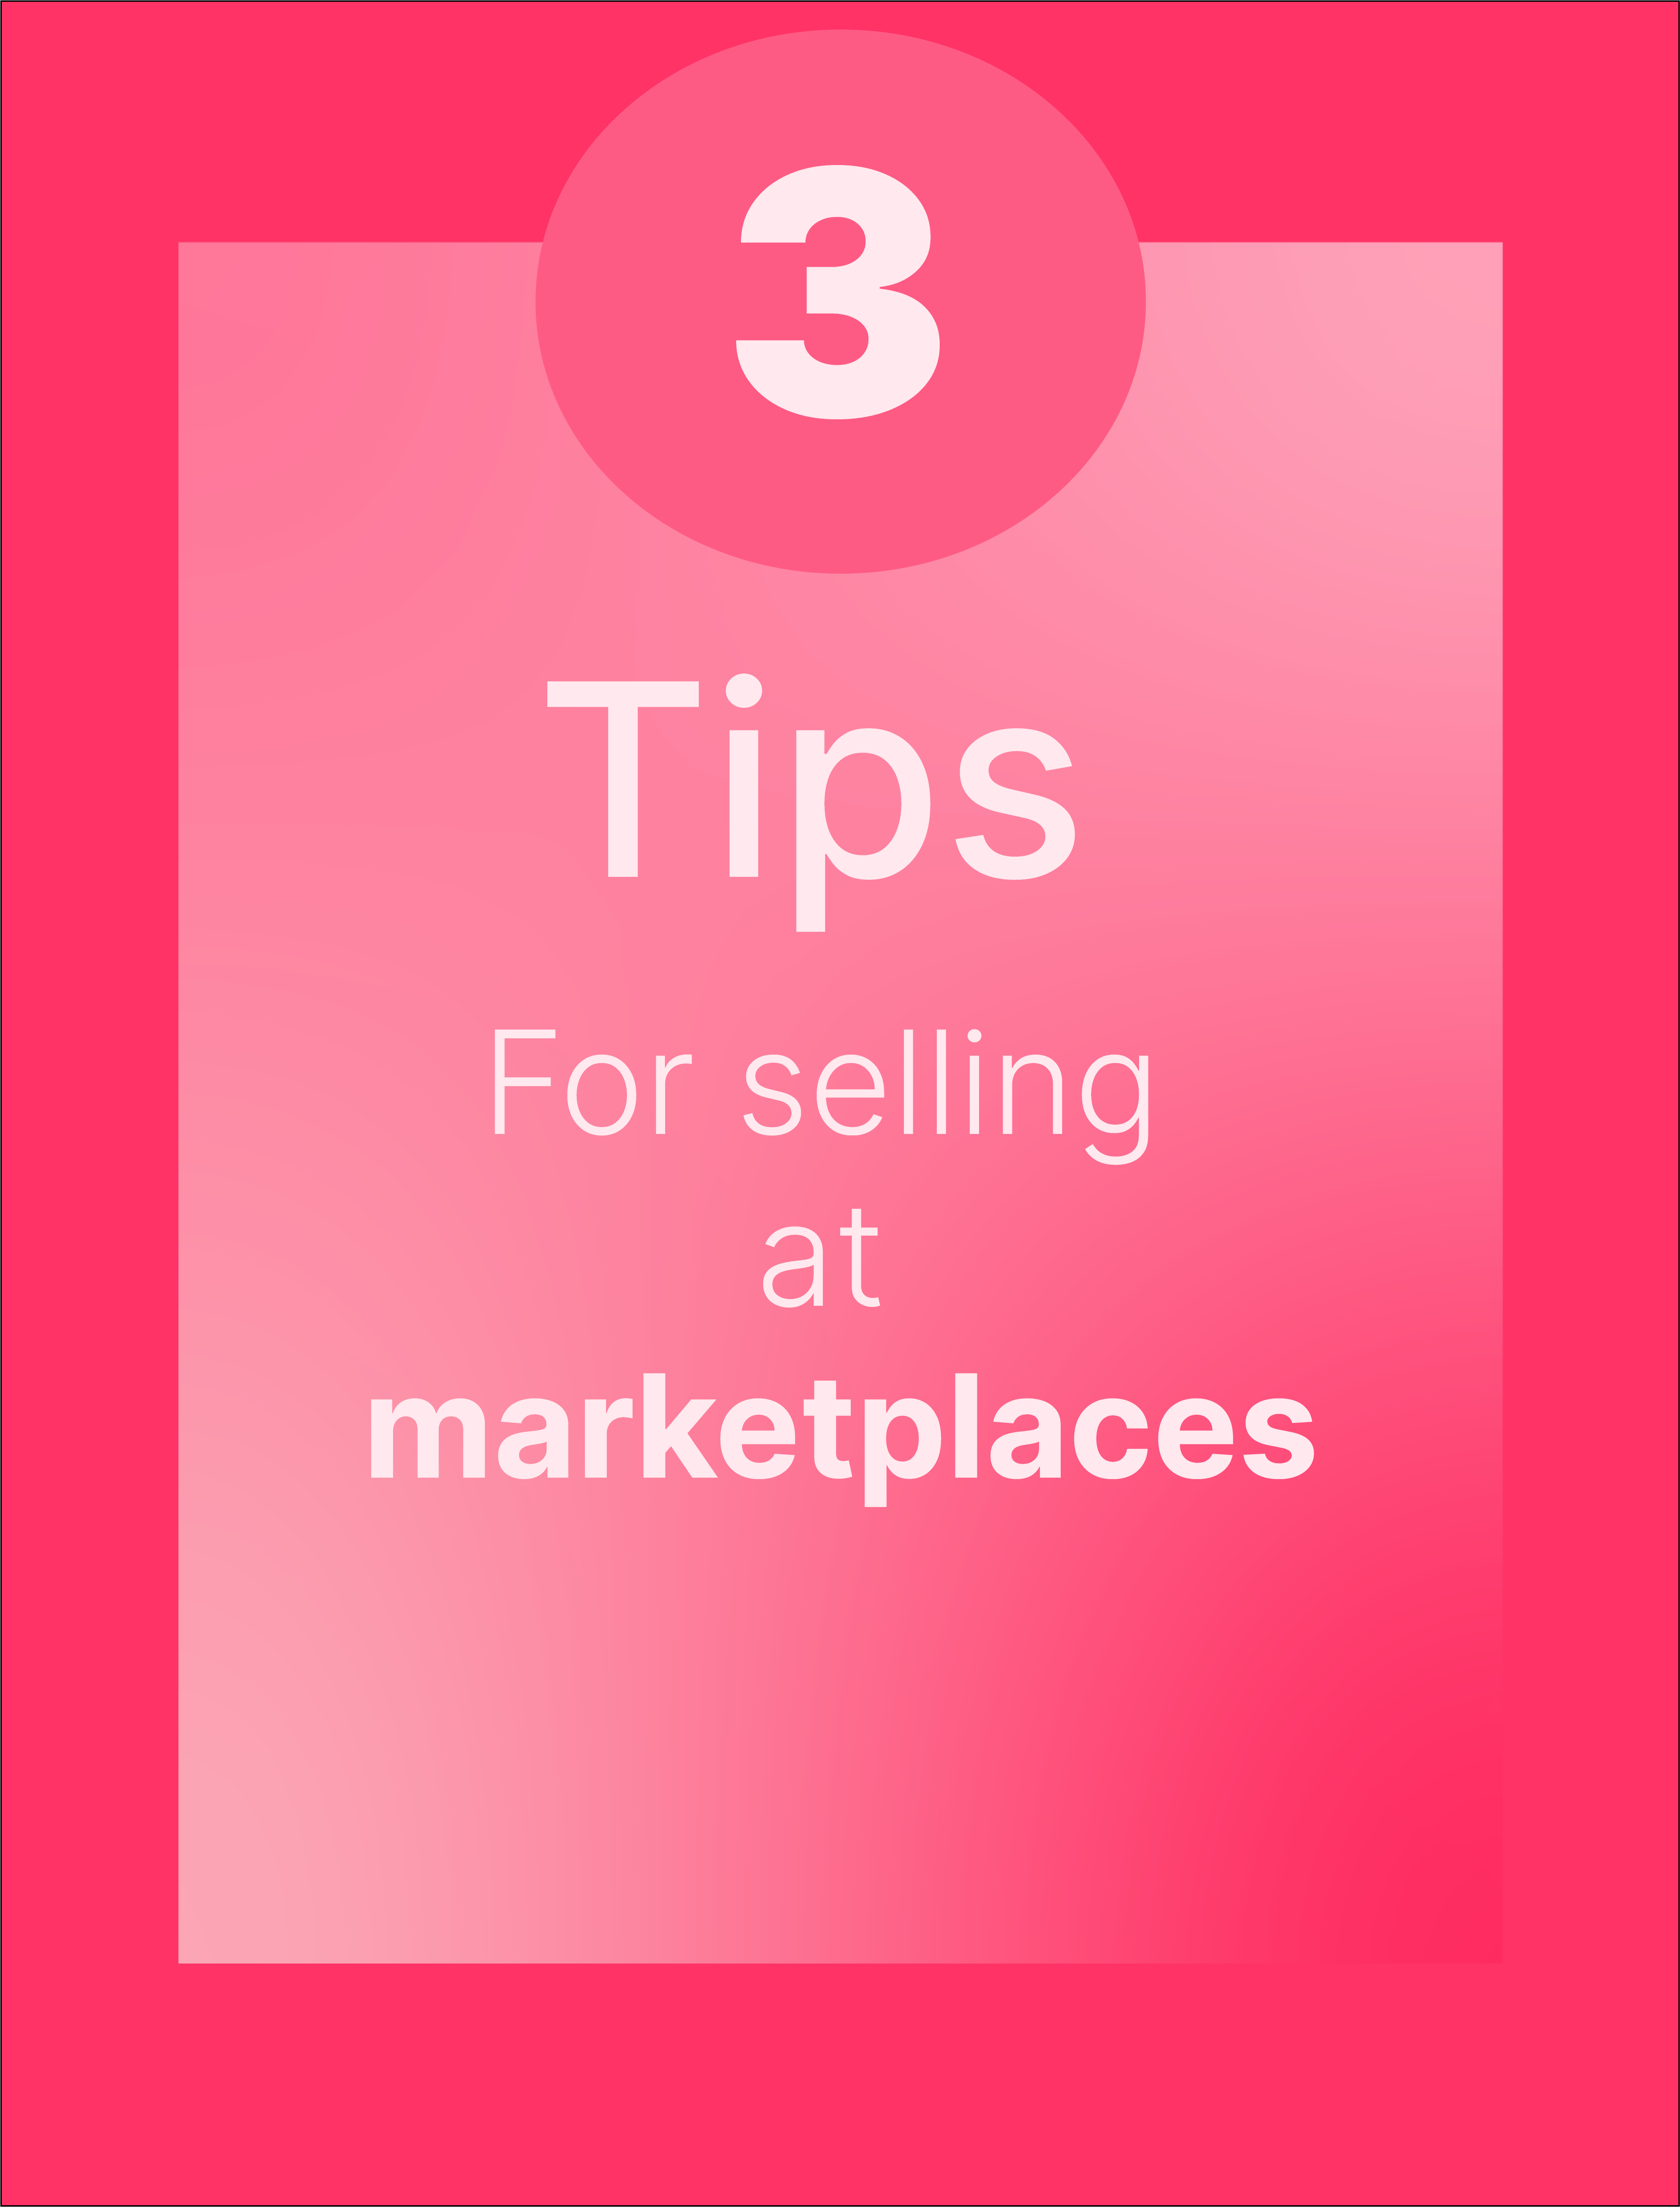 Succeed on online marketplaces - Part 3. Attributes